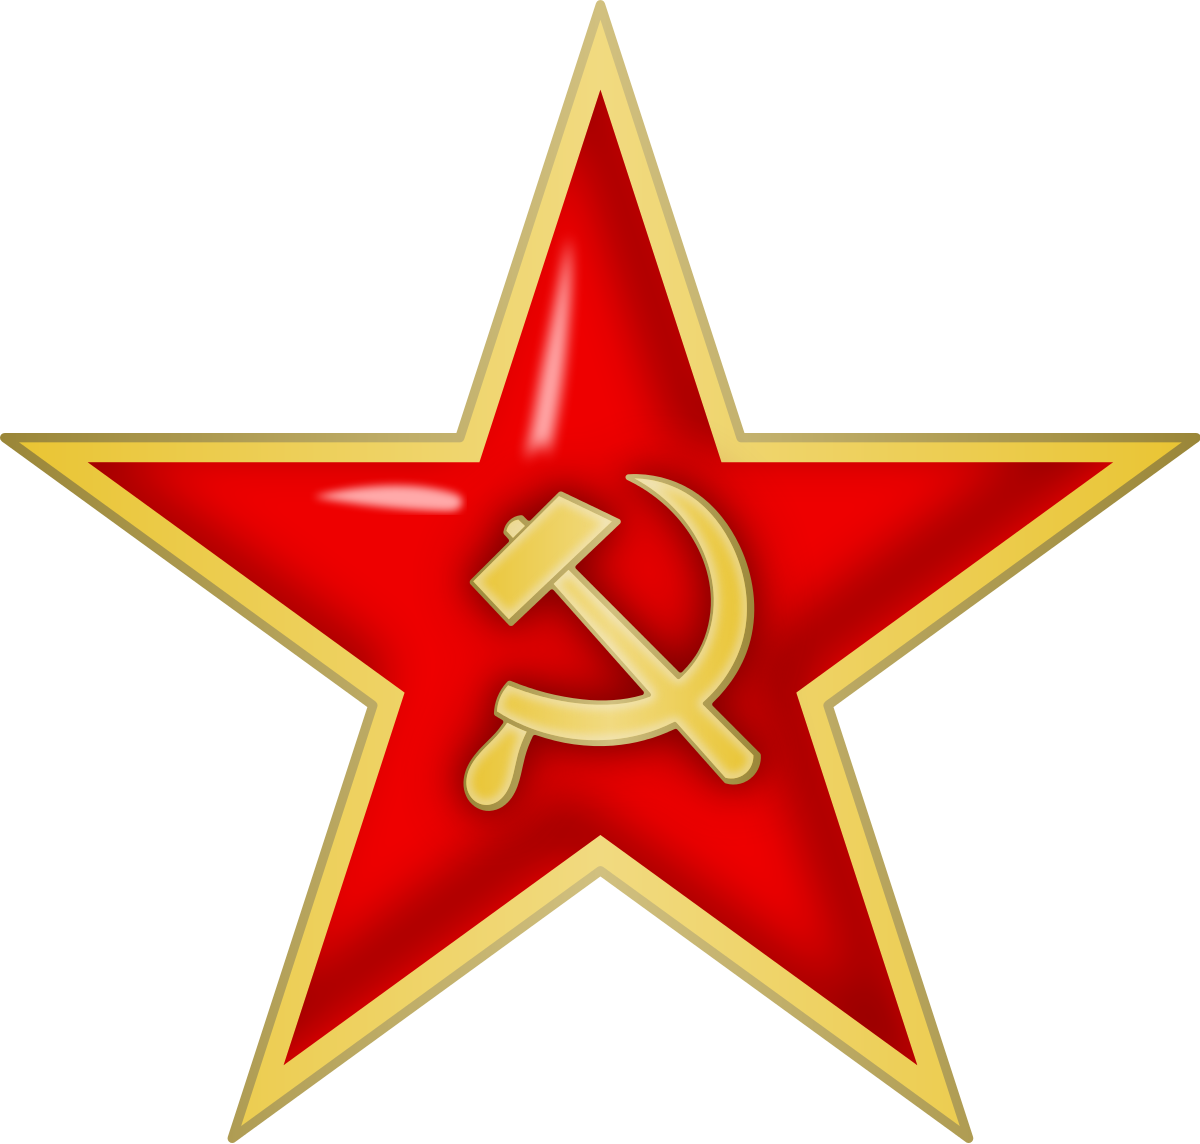 Soviet Army Wikipedia - how to add in army rank script in roblox